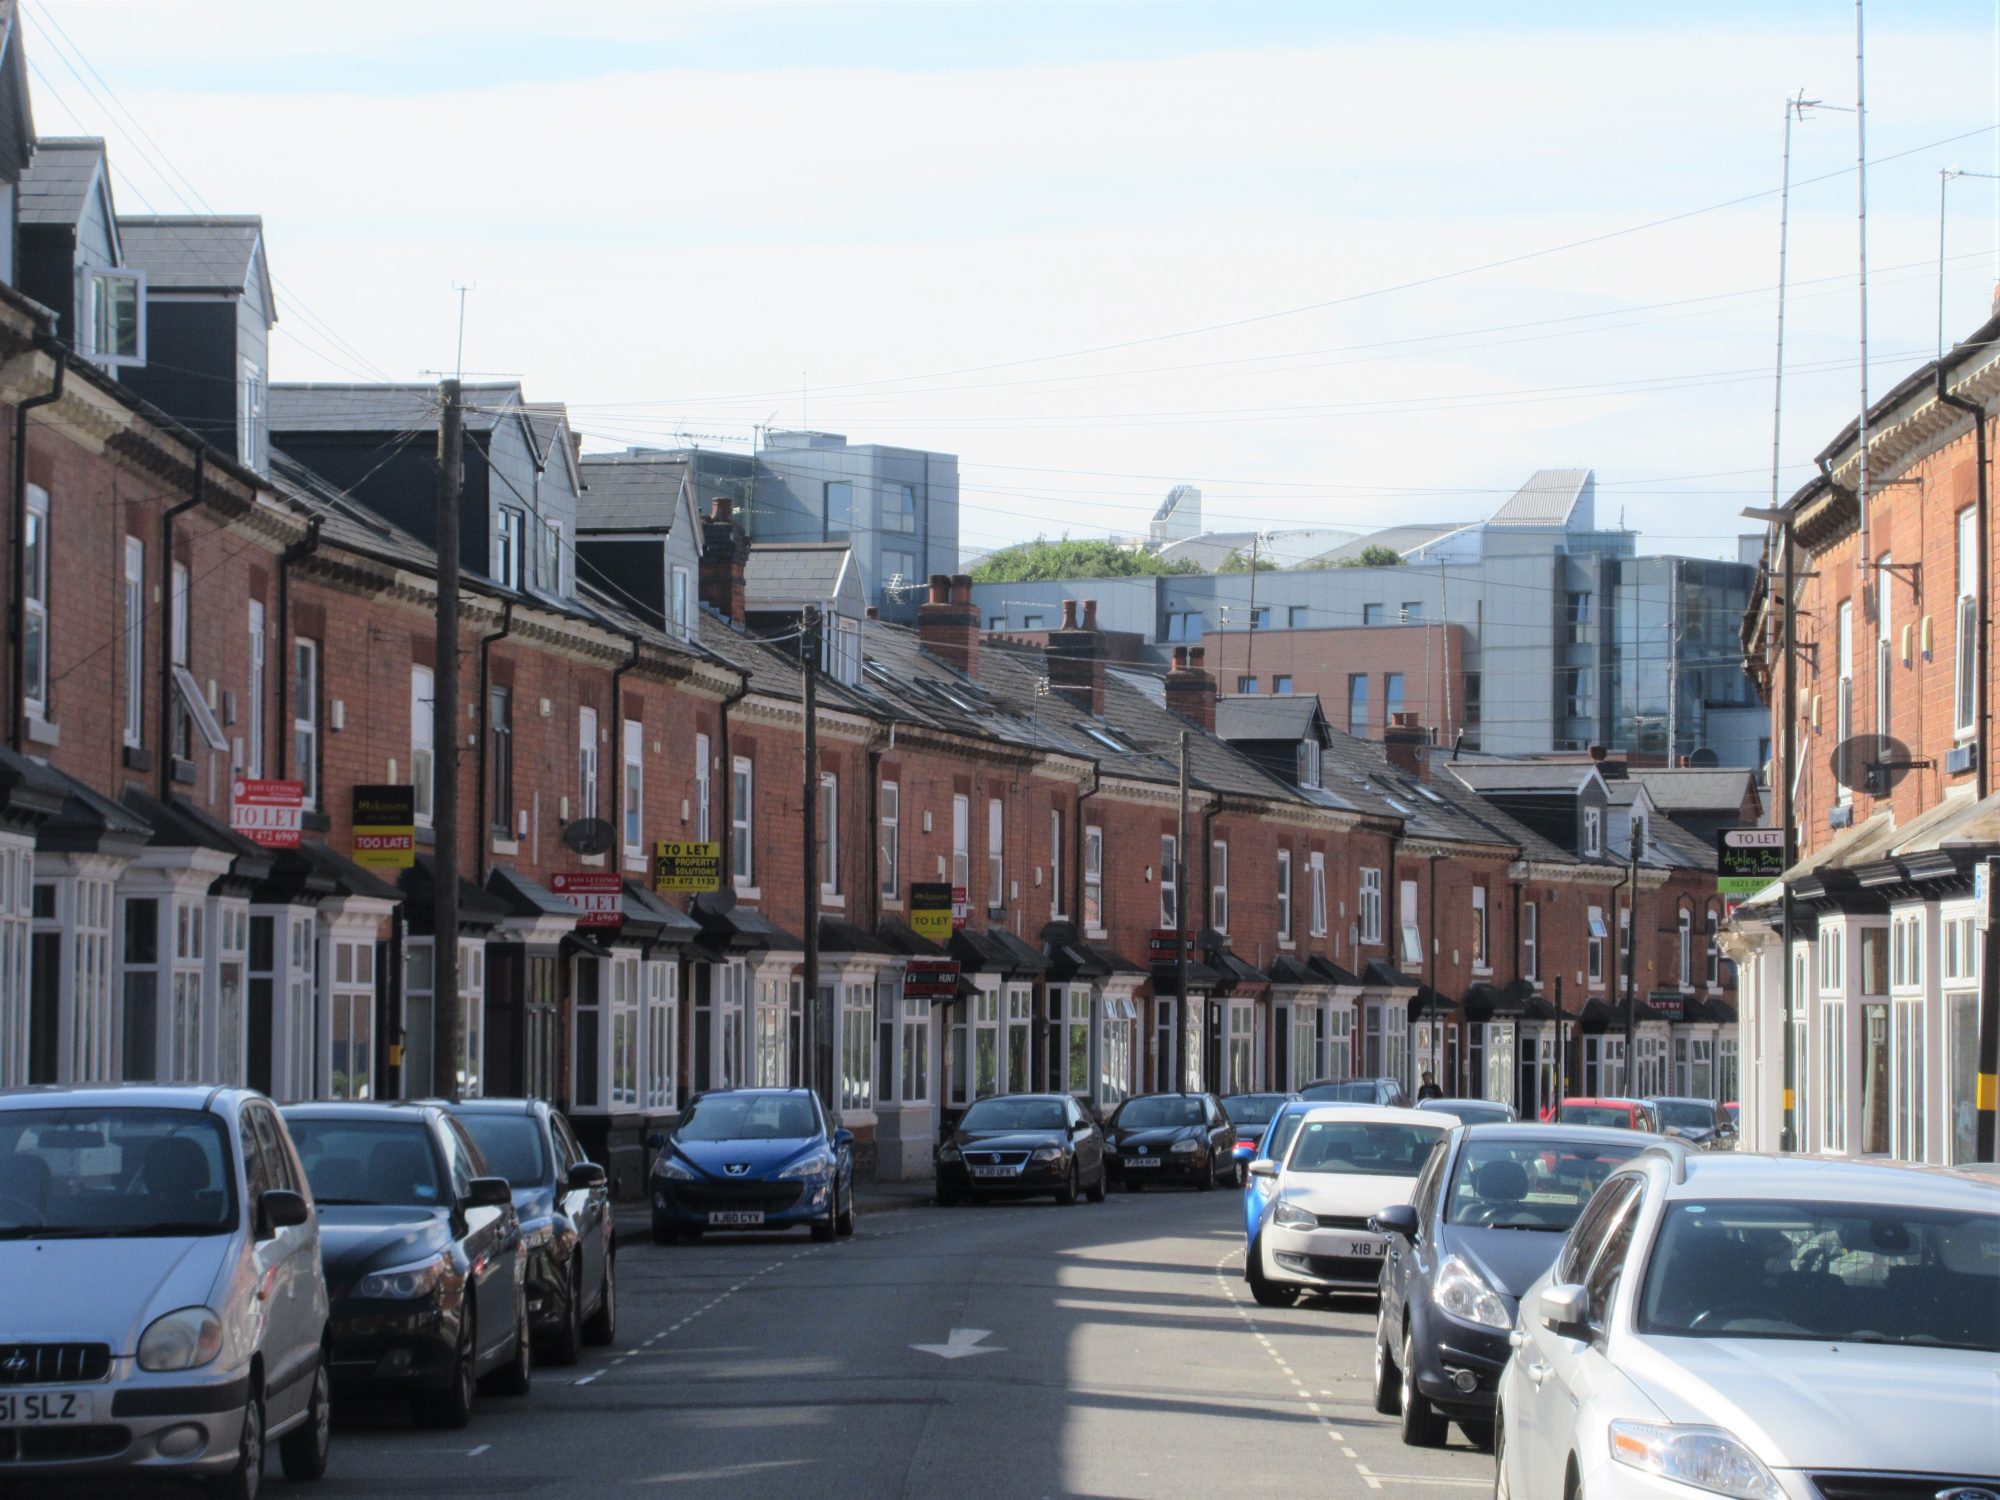 Terraced housing occupied by students in Birmingham UK